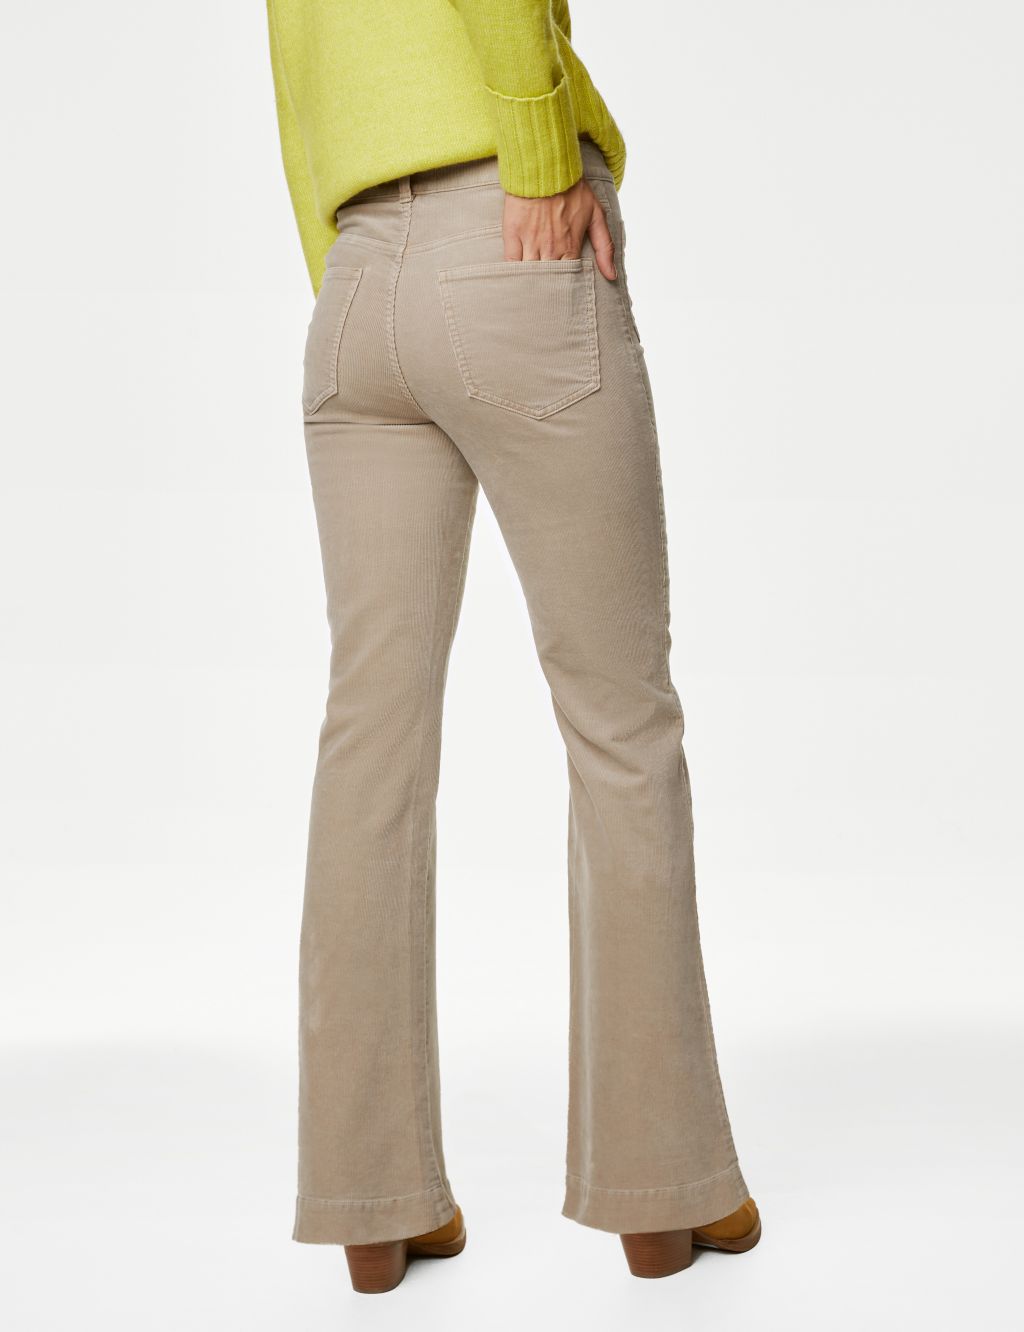 Cord High Waisted Flared Trousers image 4